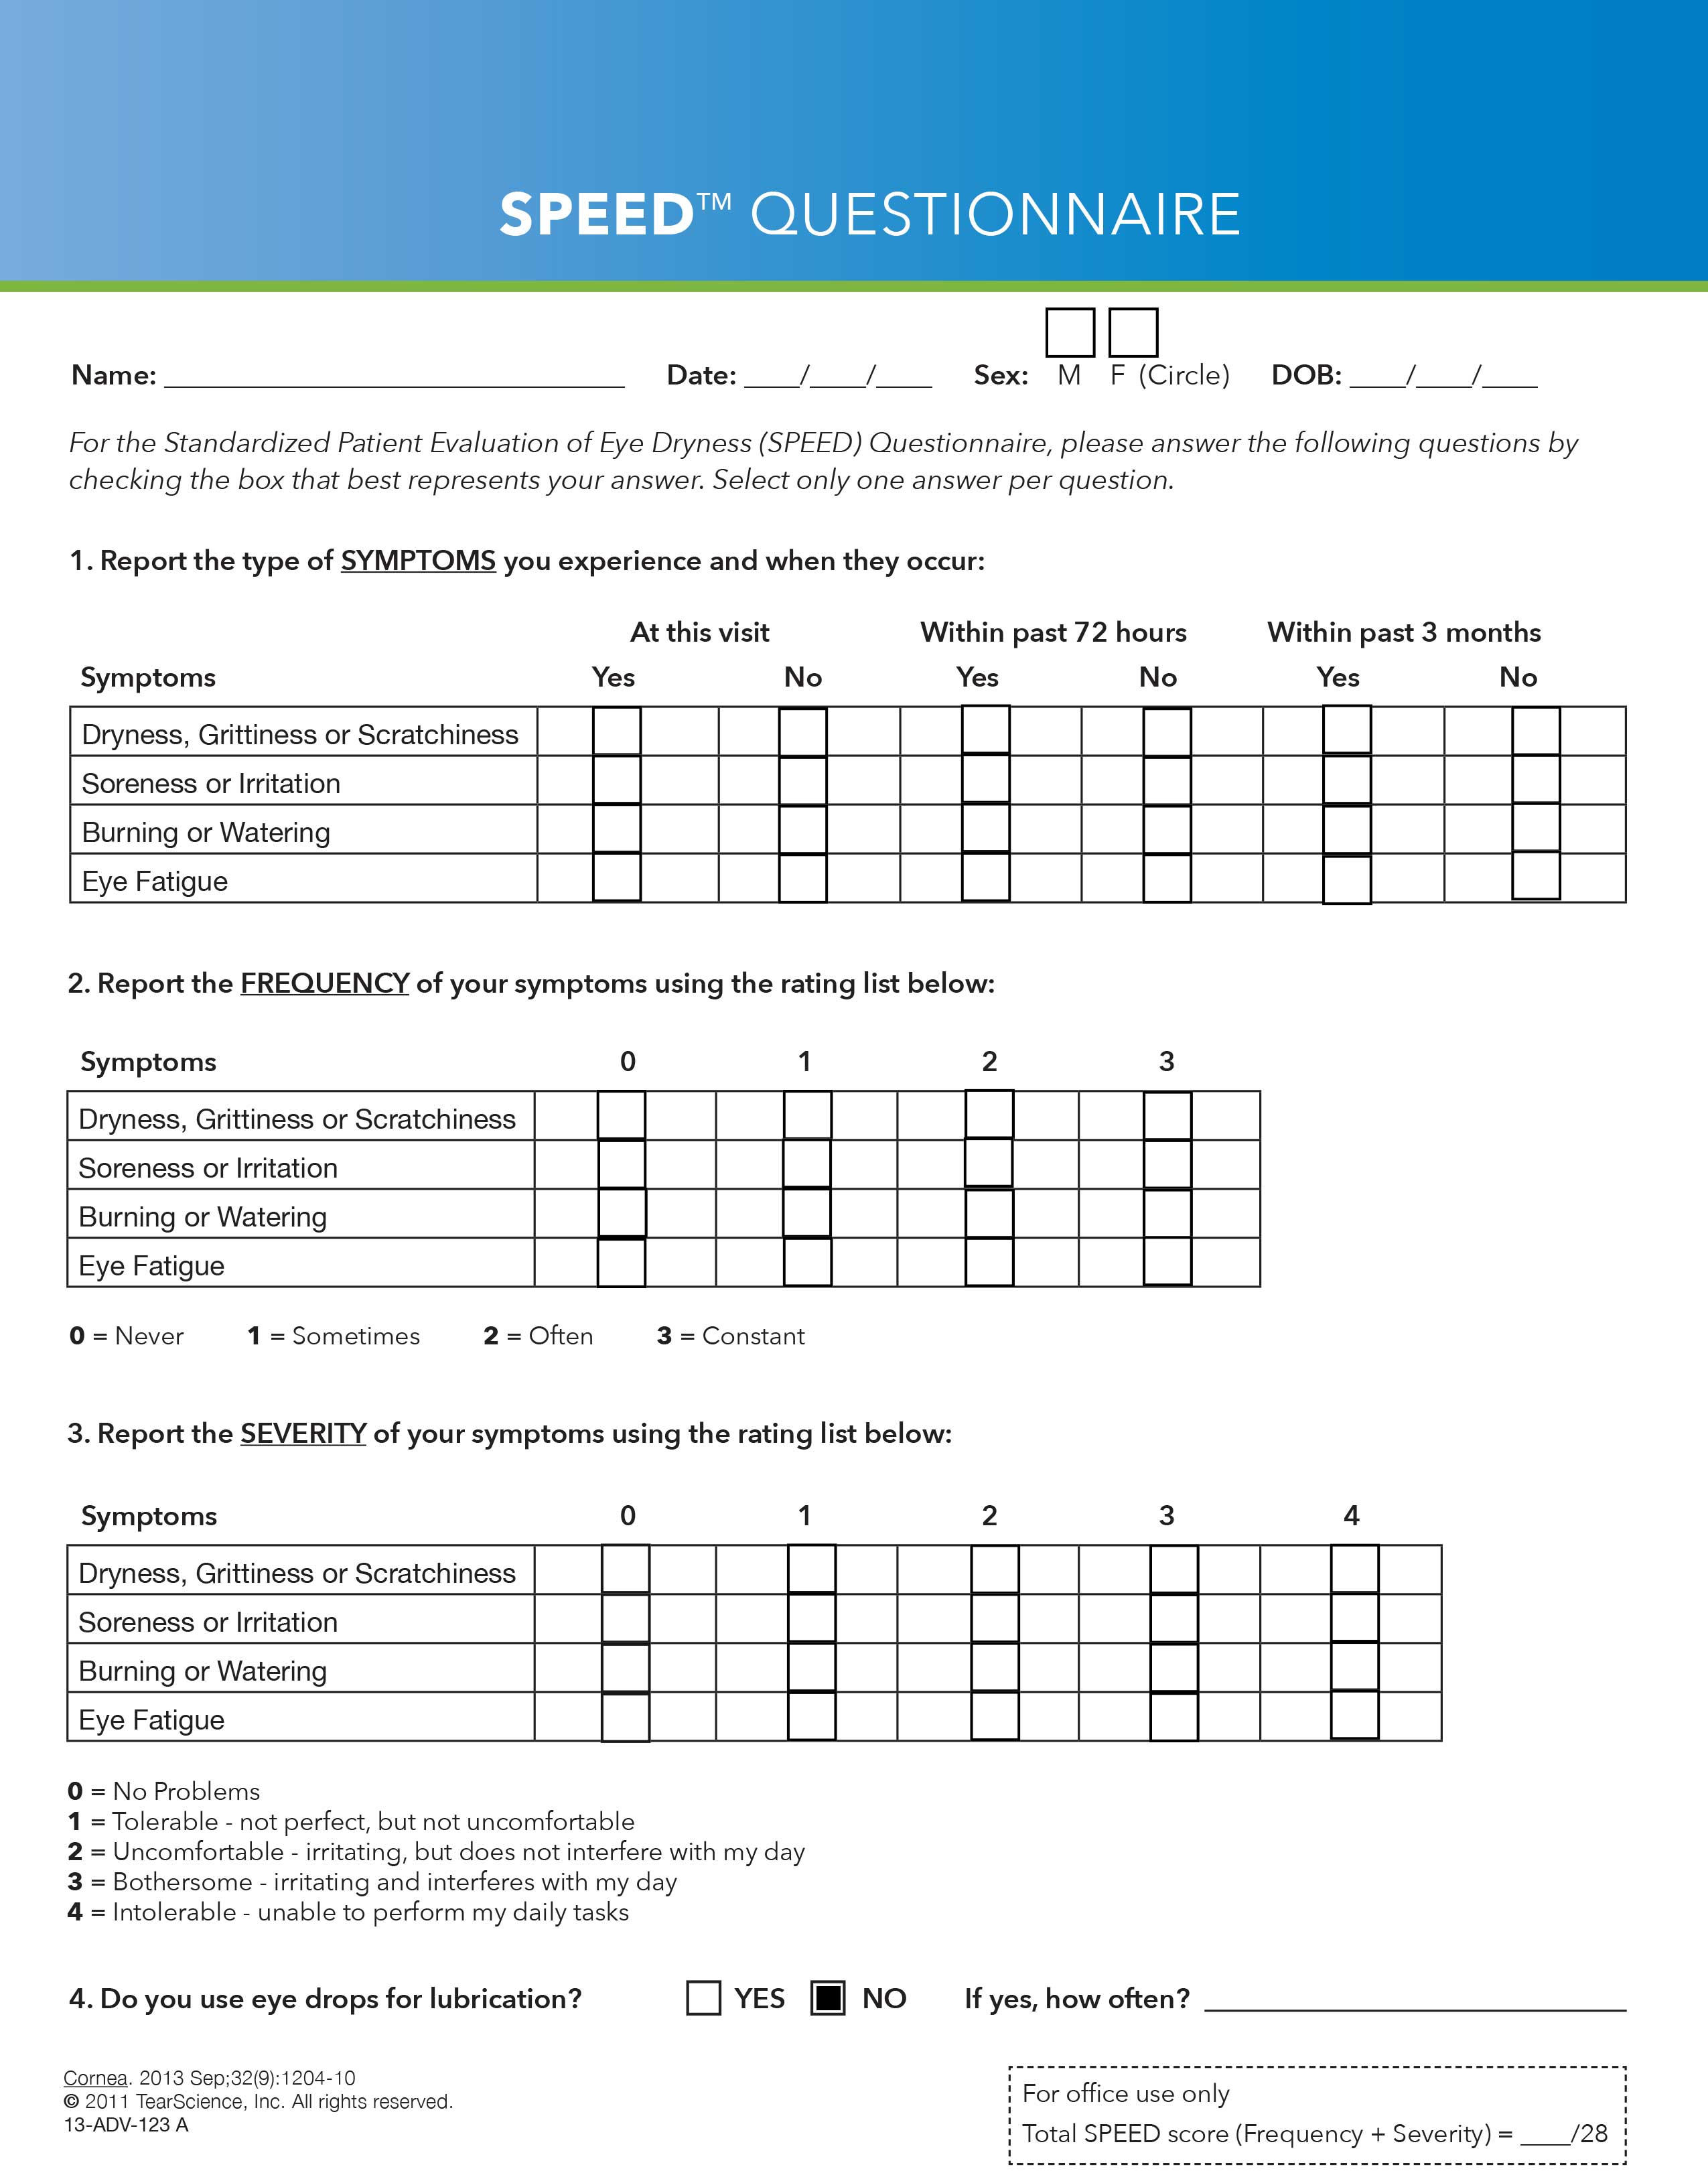 The SPEED Questionnaire, consisting of four sections, is among the most common surveys used in practice today to assess dry eye.